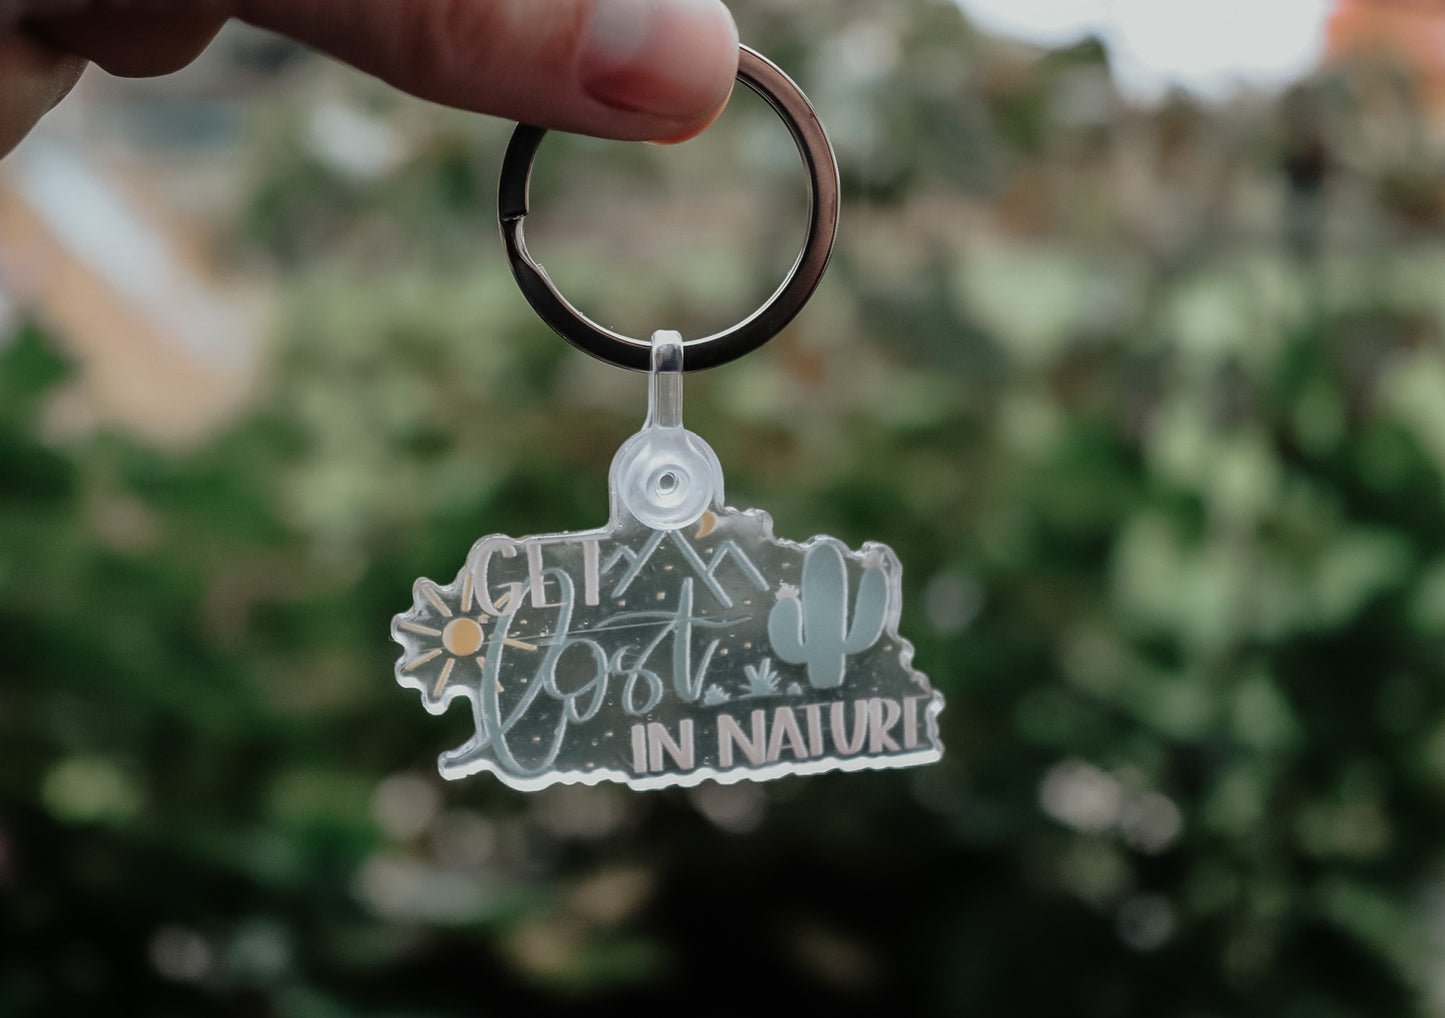 "Get Lost in nature" acrylic keychain